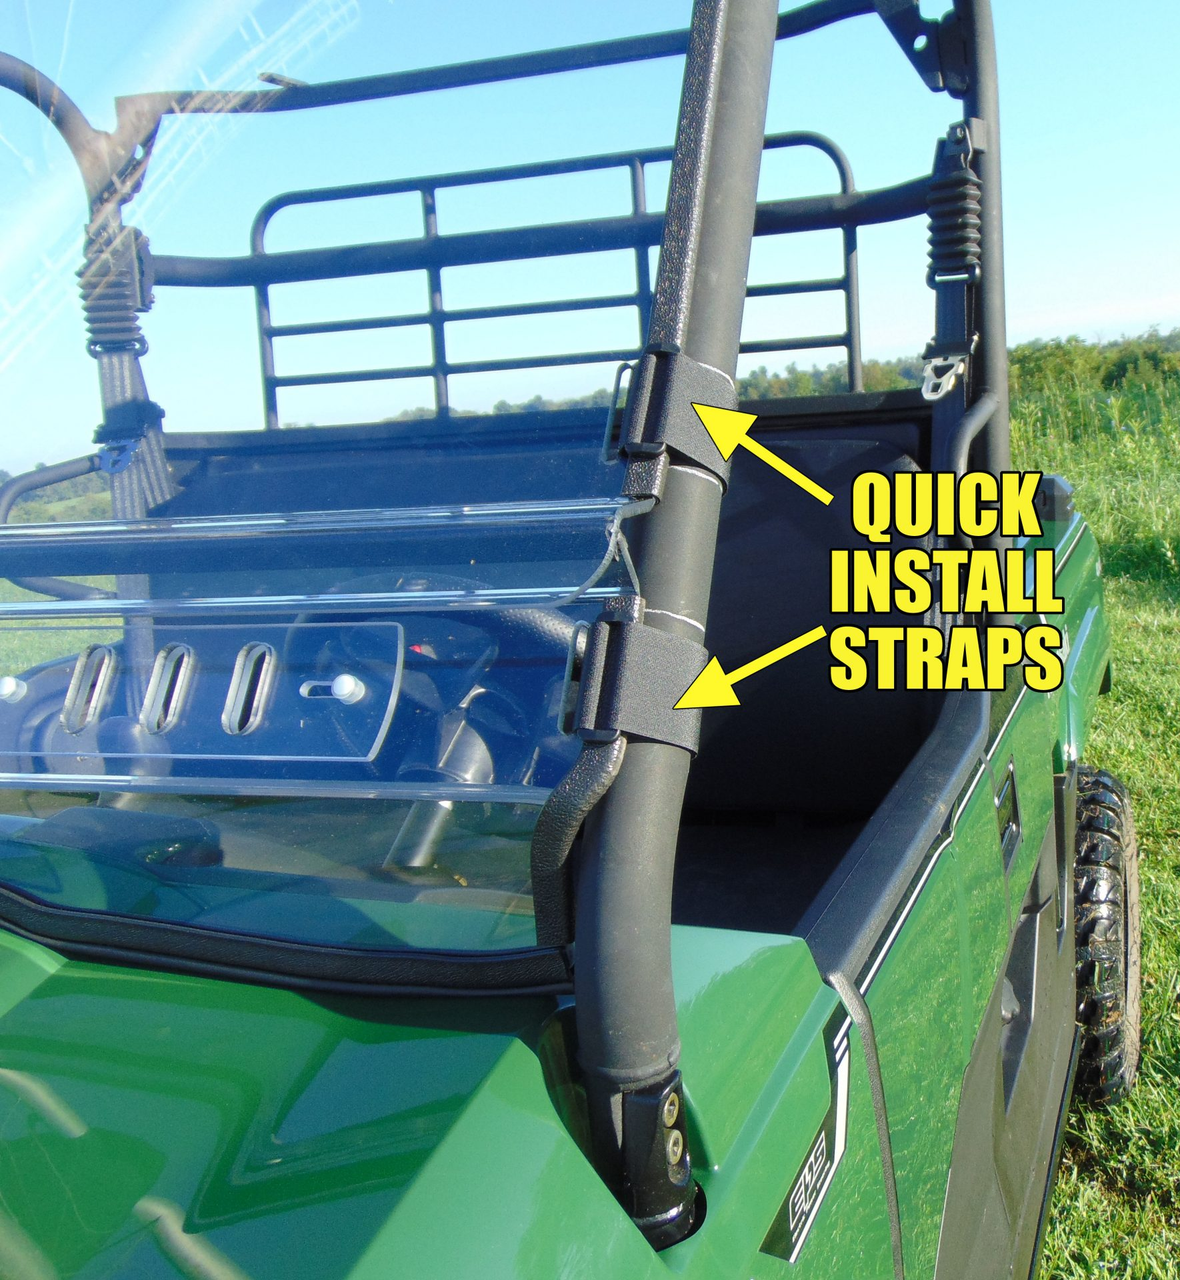 3 Star side x side CF Moto Z-Force 600 windshield quick install straps